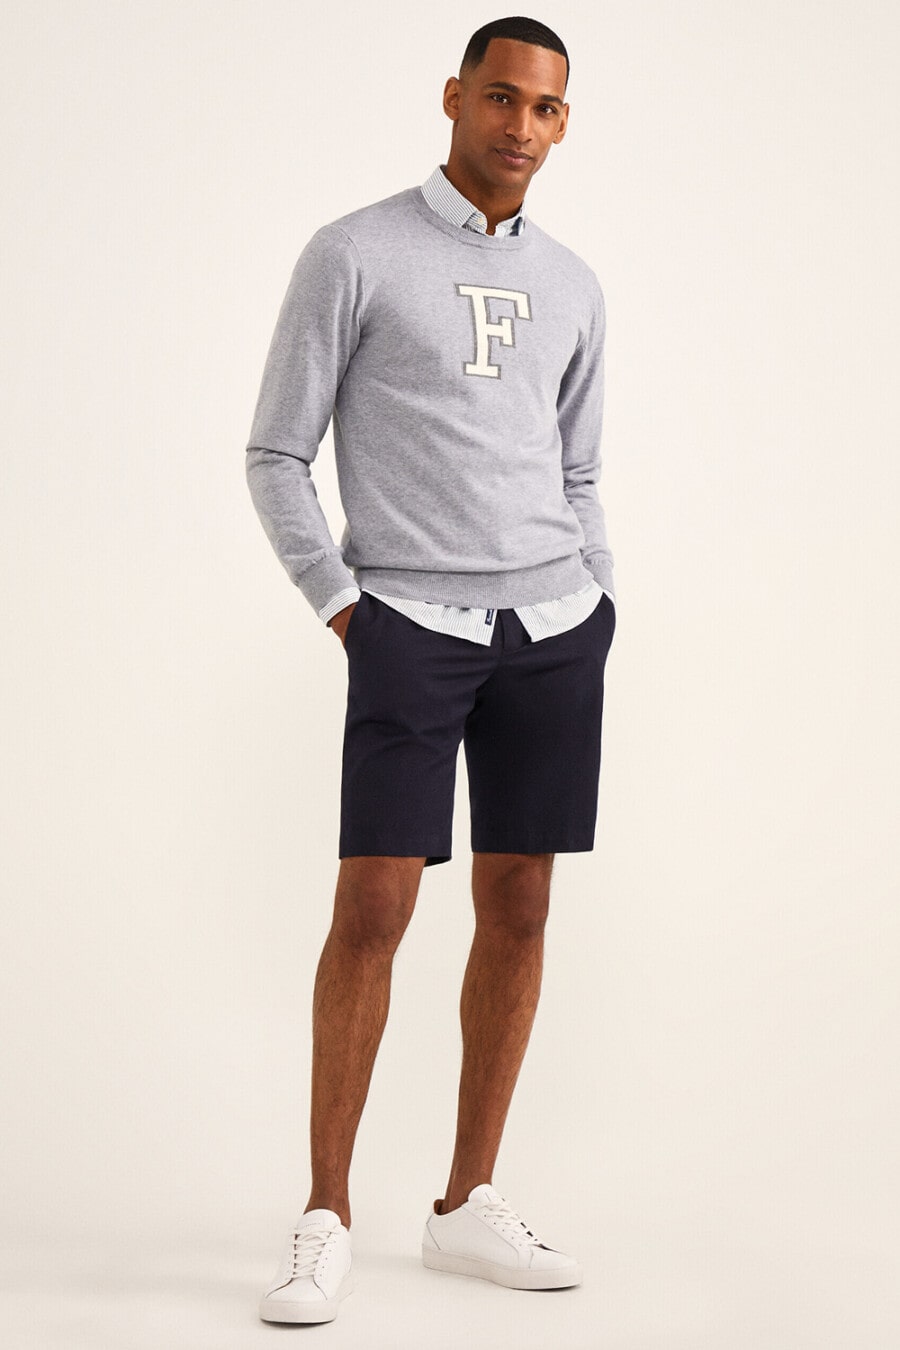 Men's navy chino shorts, sky blue shirt, grey collegiate sweater and white sneakers outfit